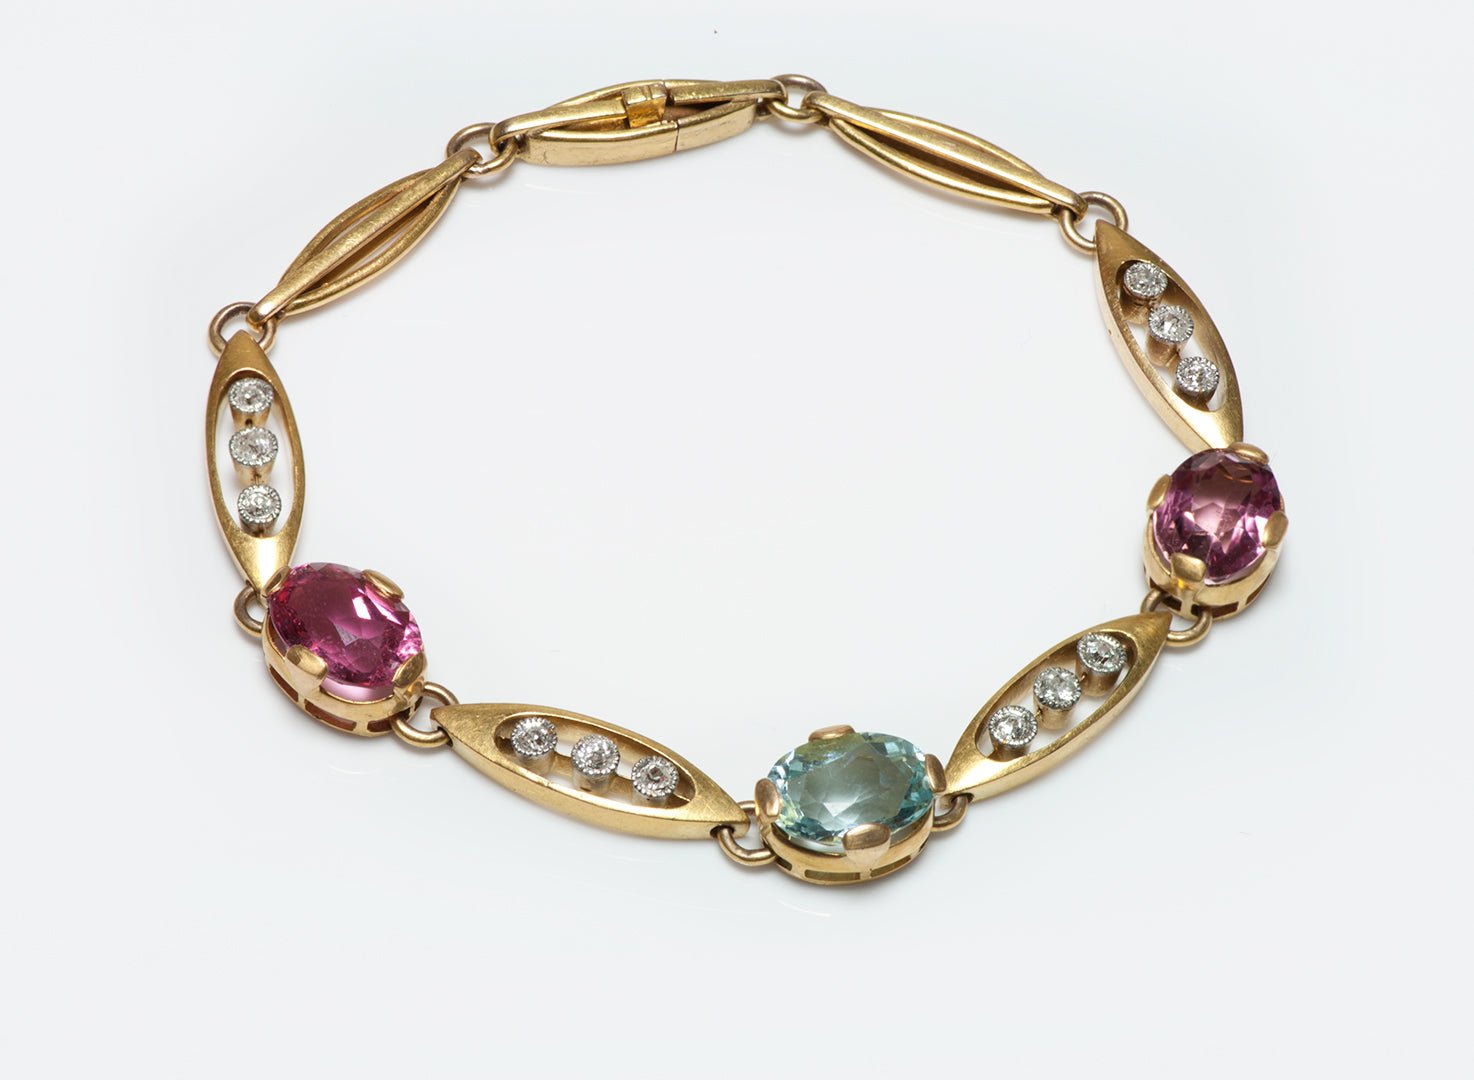 What you Should Avoid When Wearing Vintage or Antique Bracelets - DSF Antique Jewelry